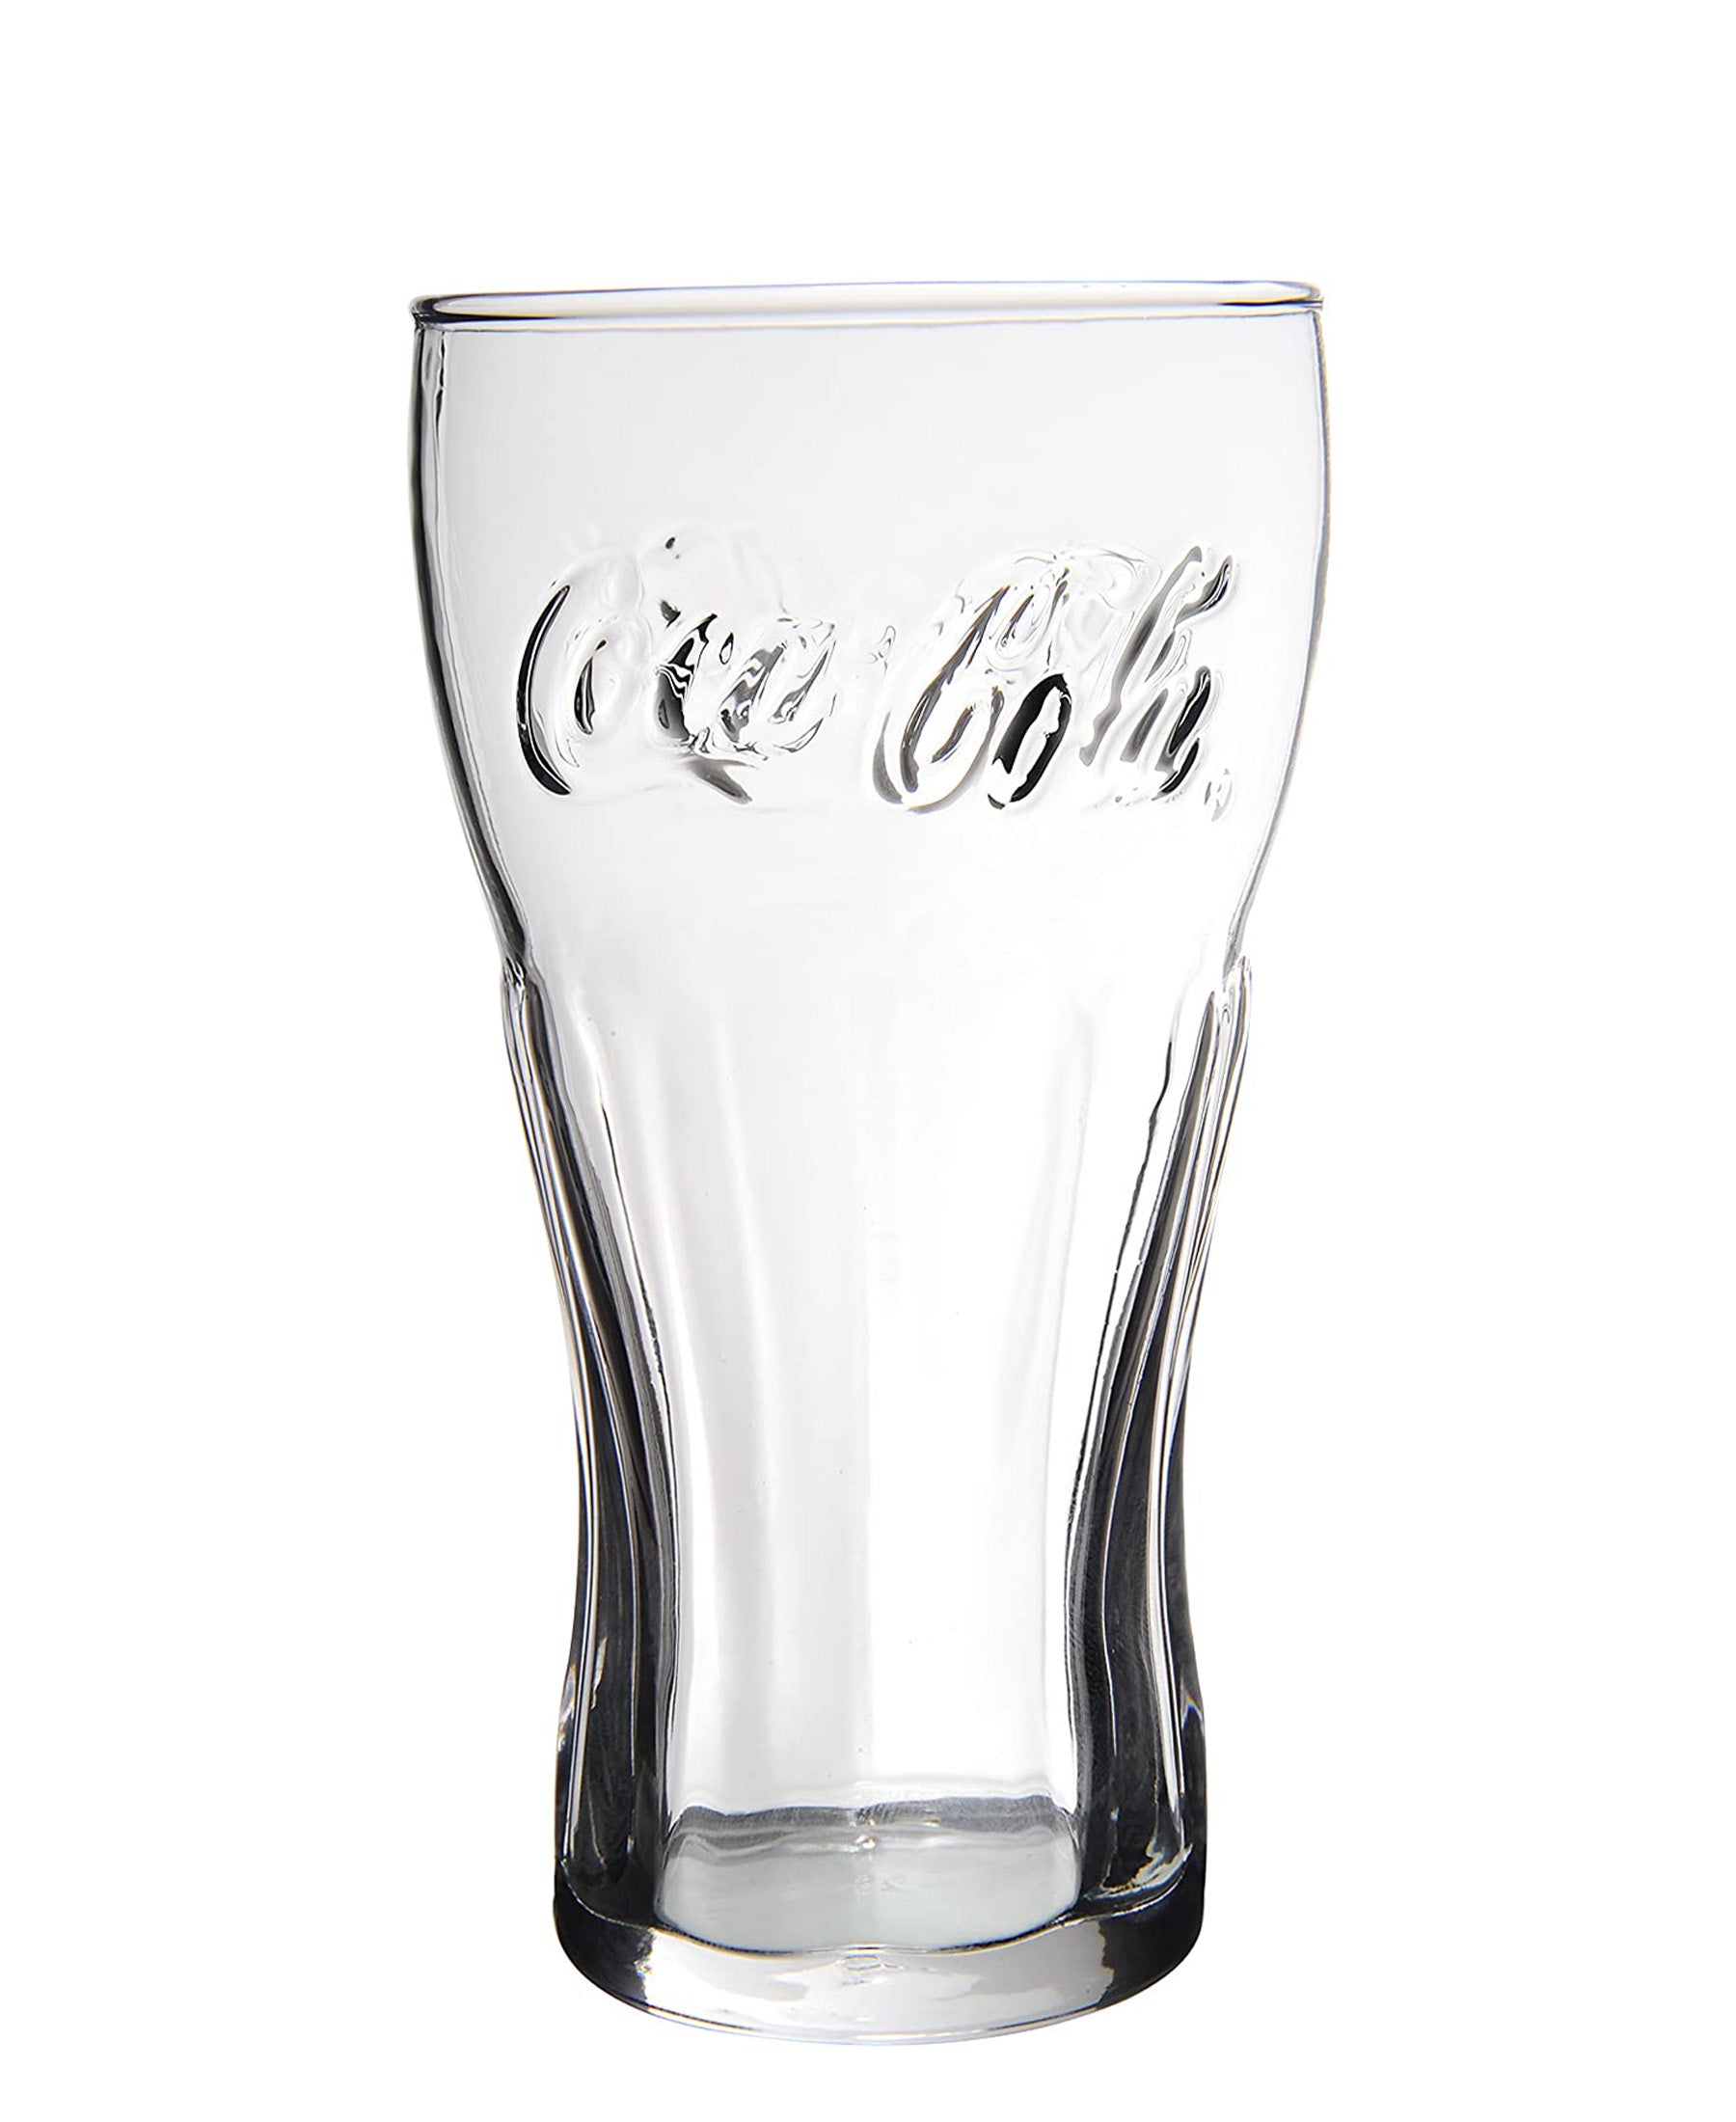 Pasabahce Coca Cola 300ml Glass - Clear